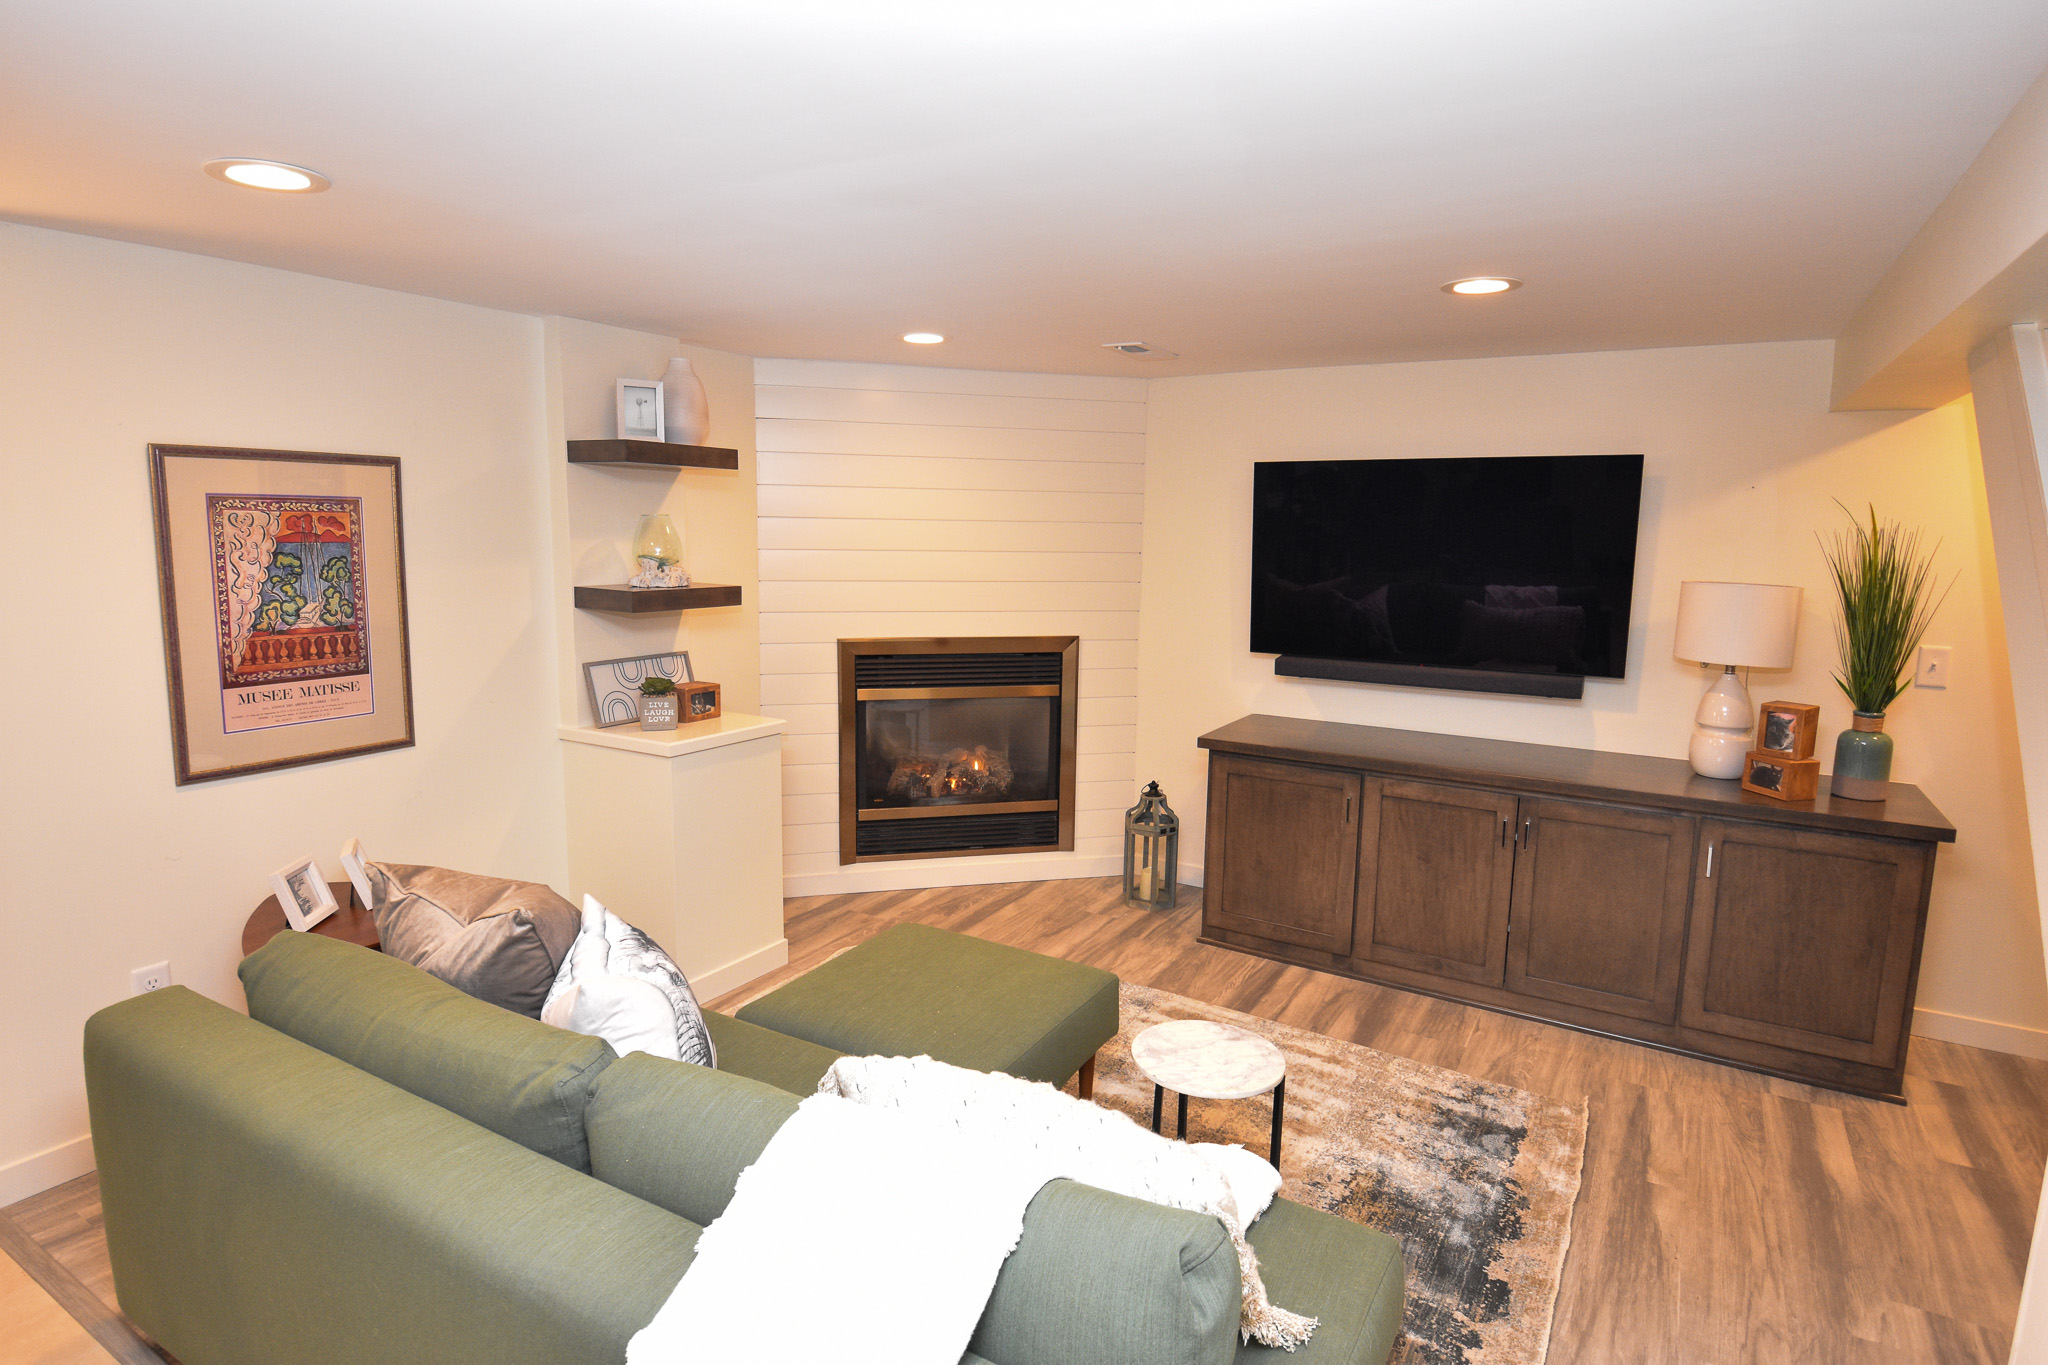 Basement remodel with white wood paneling, vinyl flooring, TV, fireplace